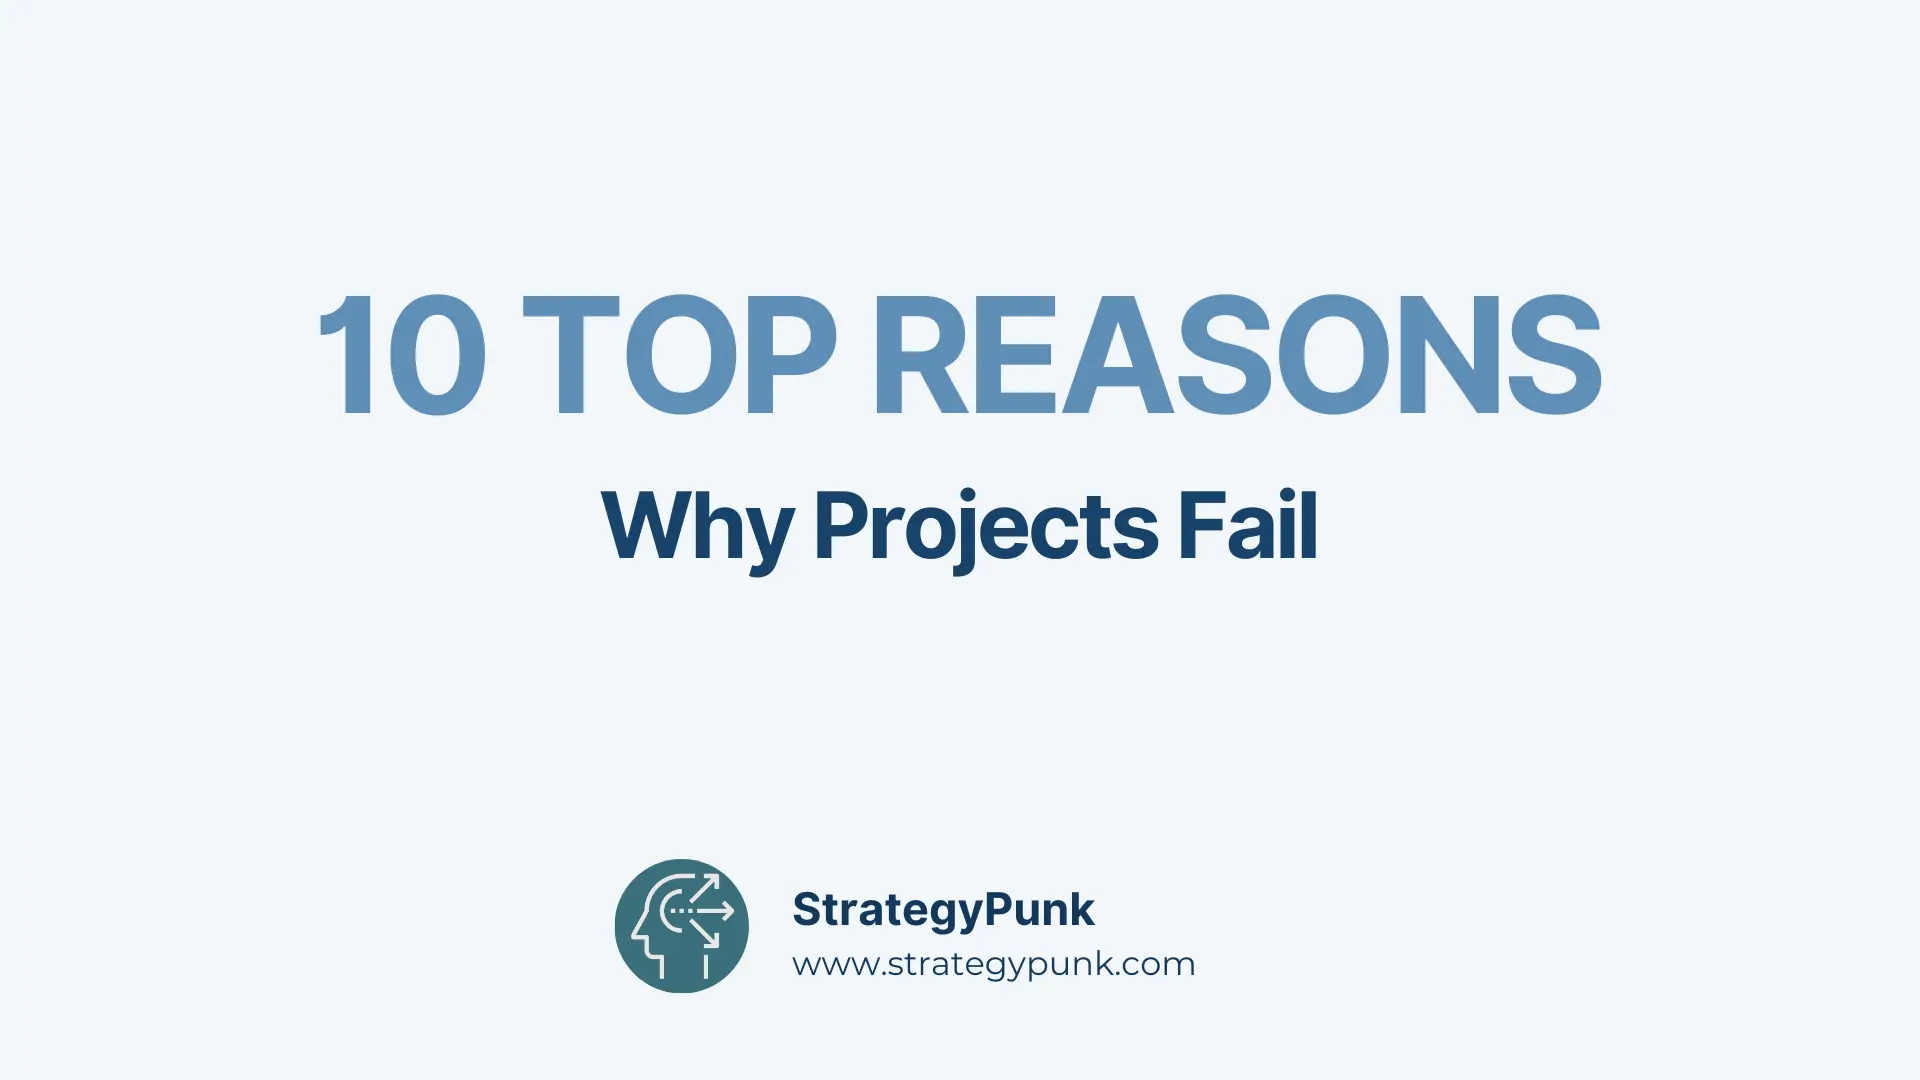 The Top 10 Reasons Why Projects Fail